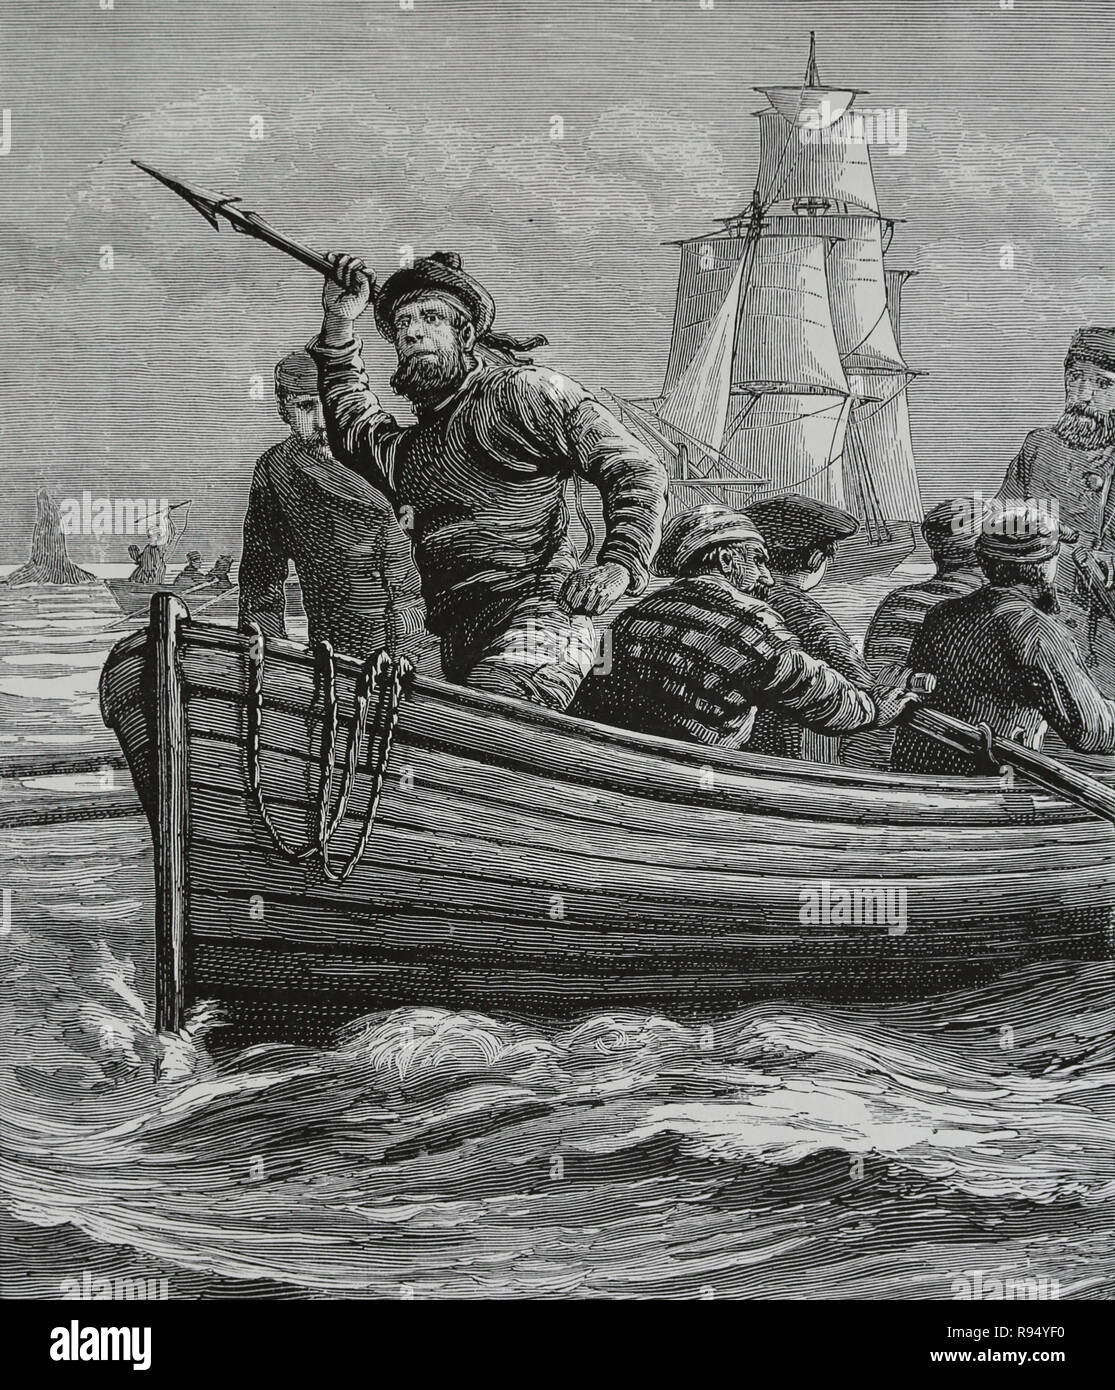 Whalers hunting in the Arctic. Engraving, 19th century. Stock Photo